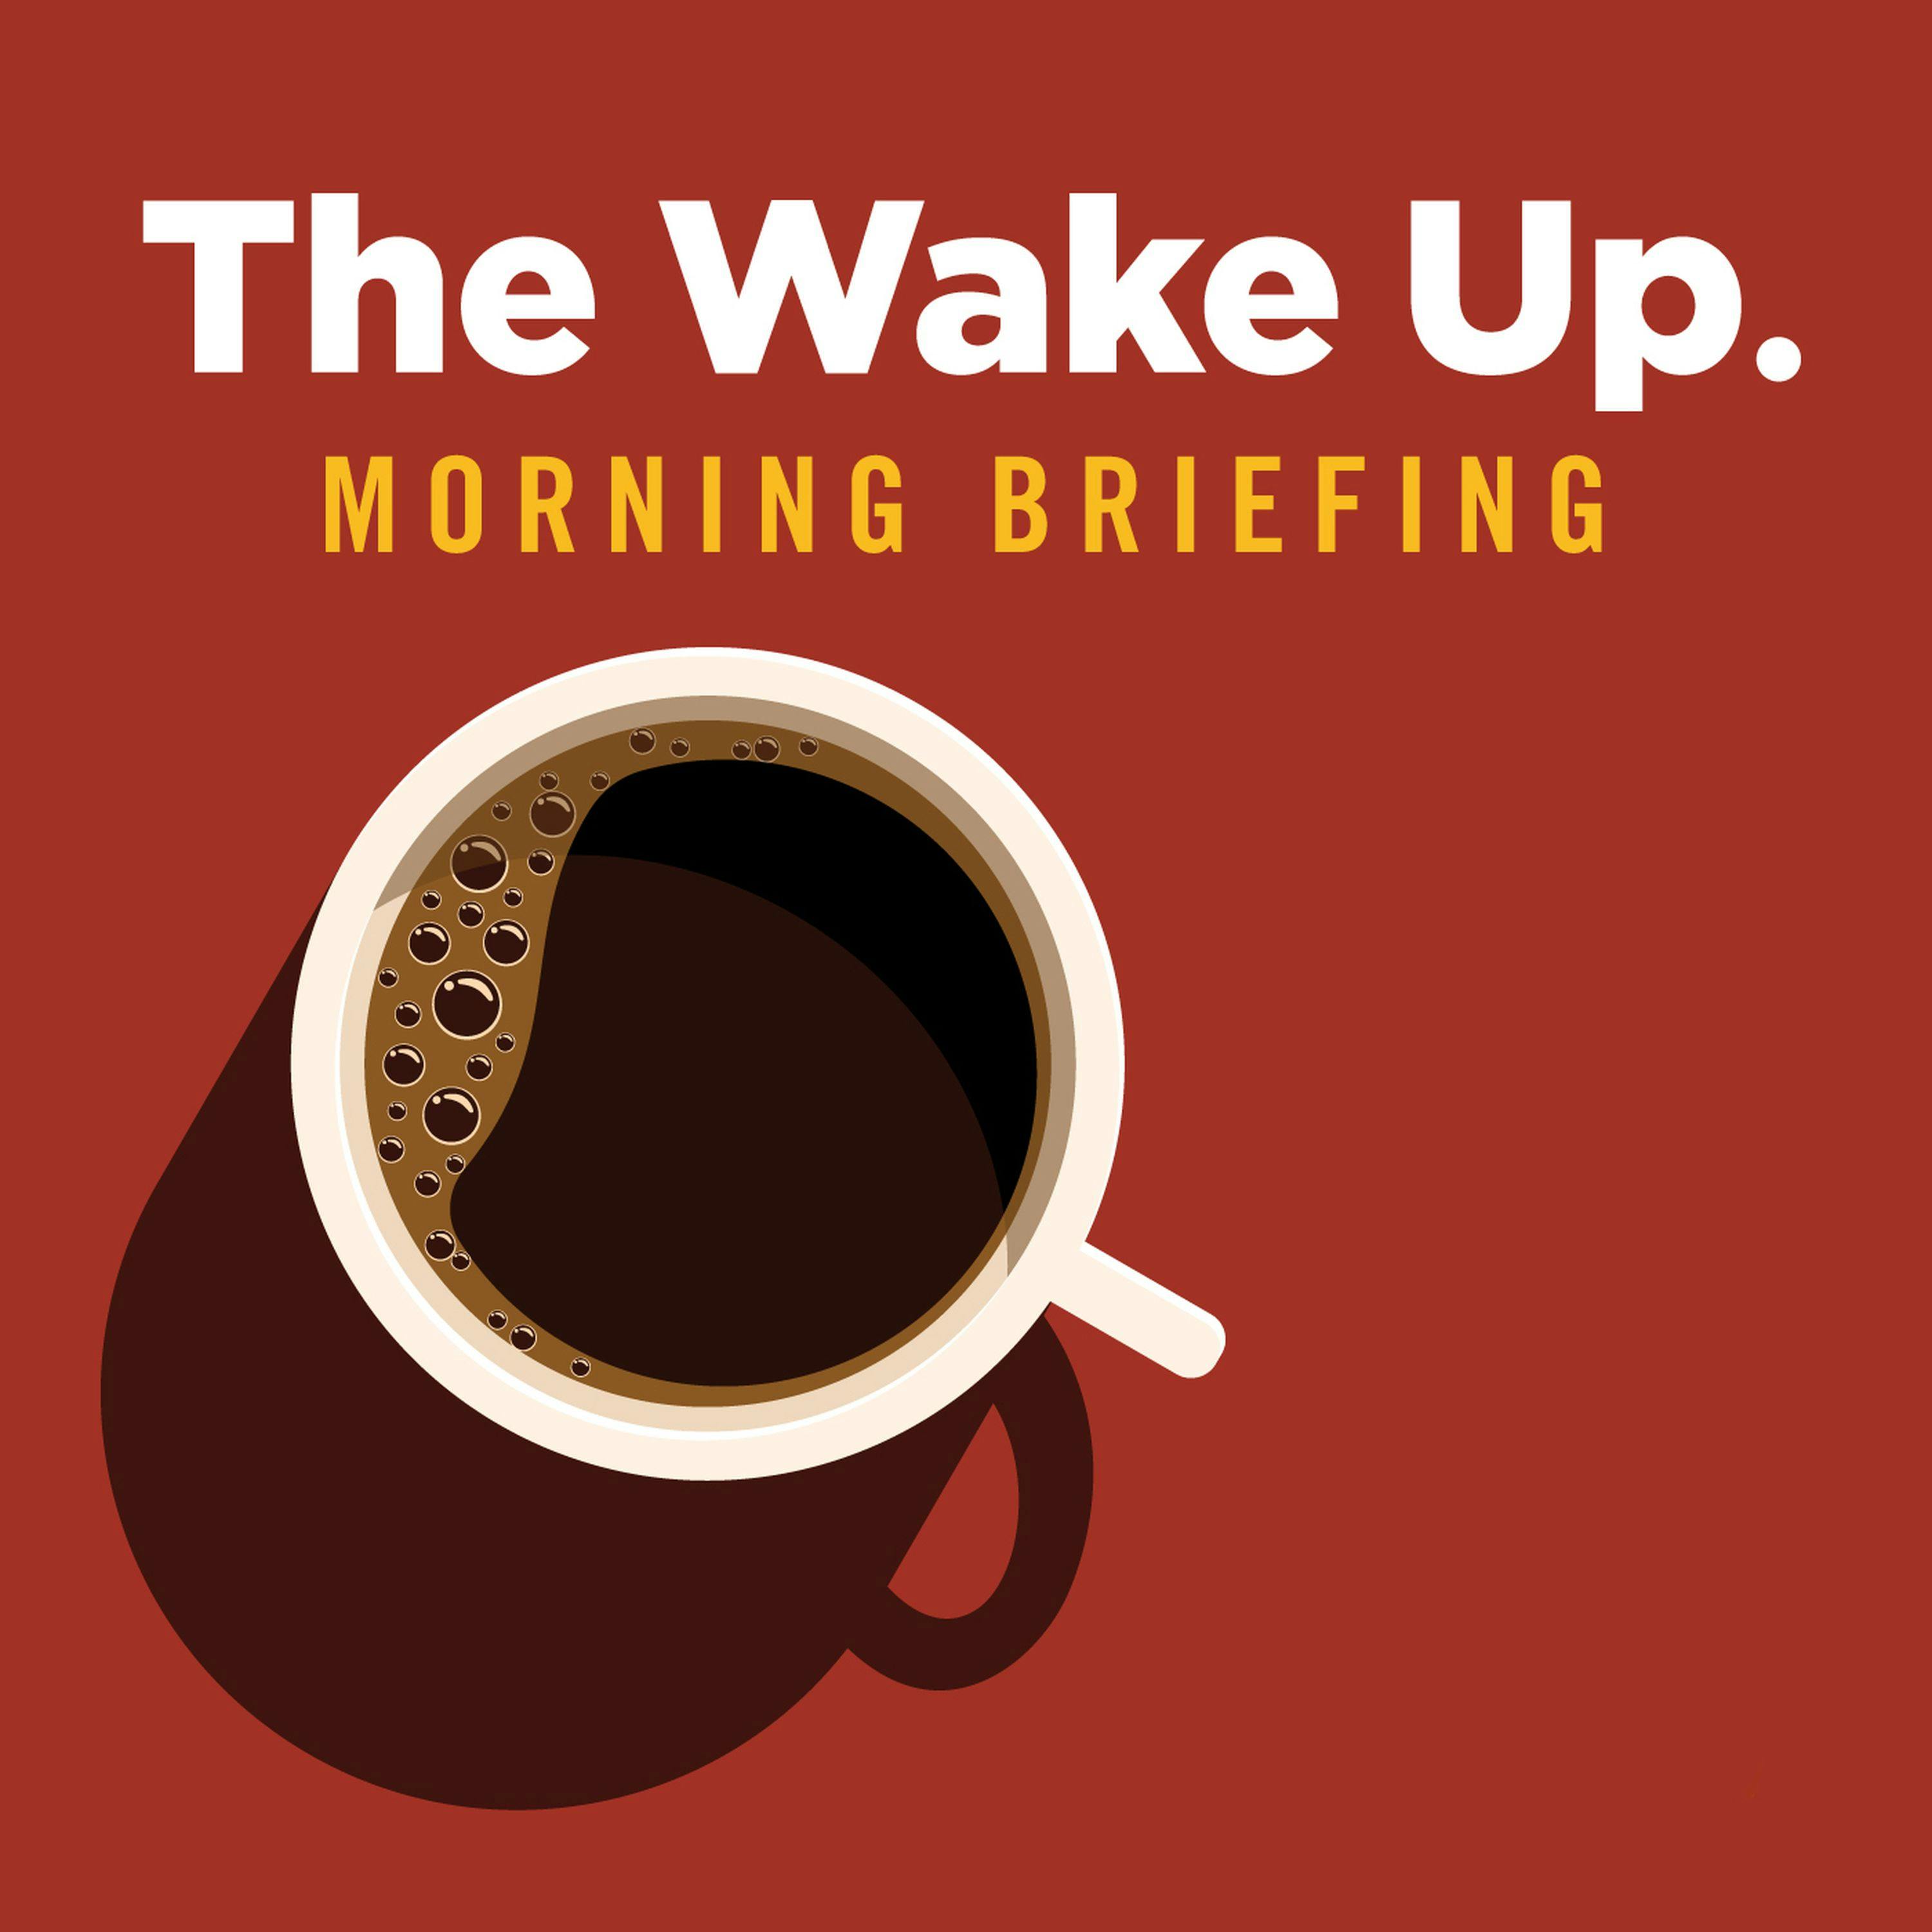 The Wake Up - Feb. 17, 2021 With people steamed about Ohio's scattershot vaccination program, Mike DeWine plans a central registry